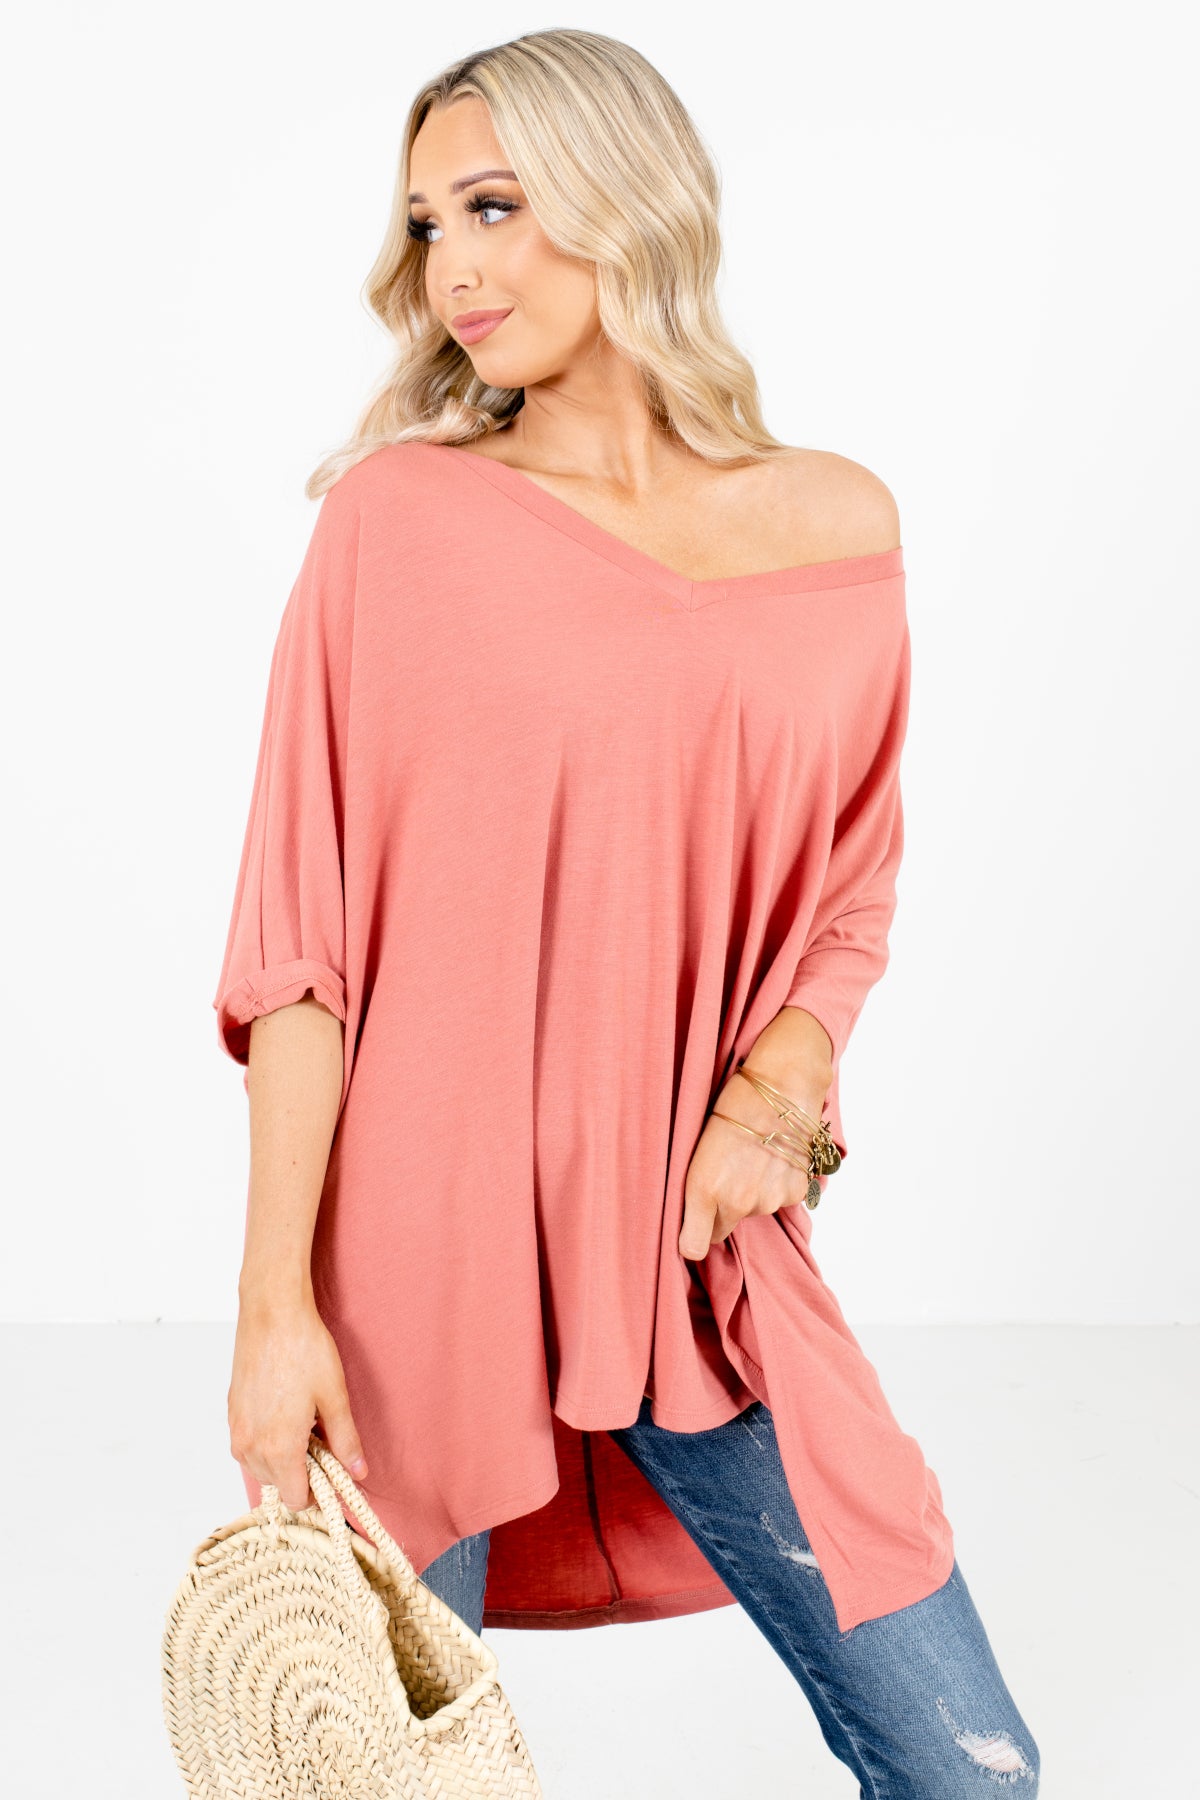 Pink Poncho Style Boutique Tops for Women